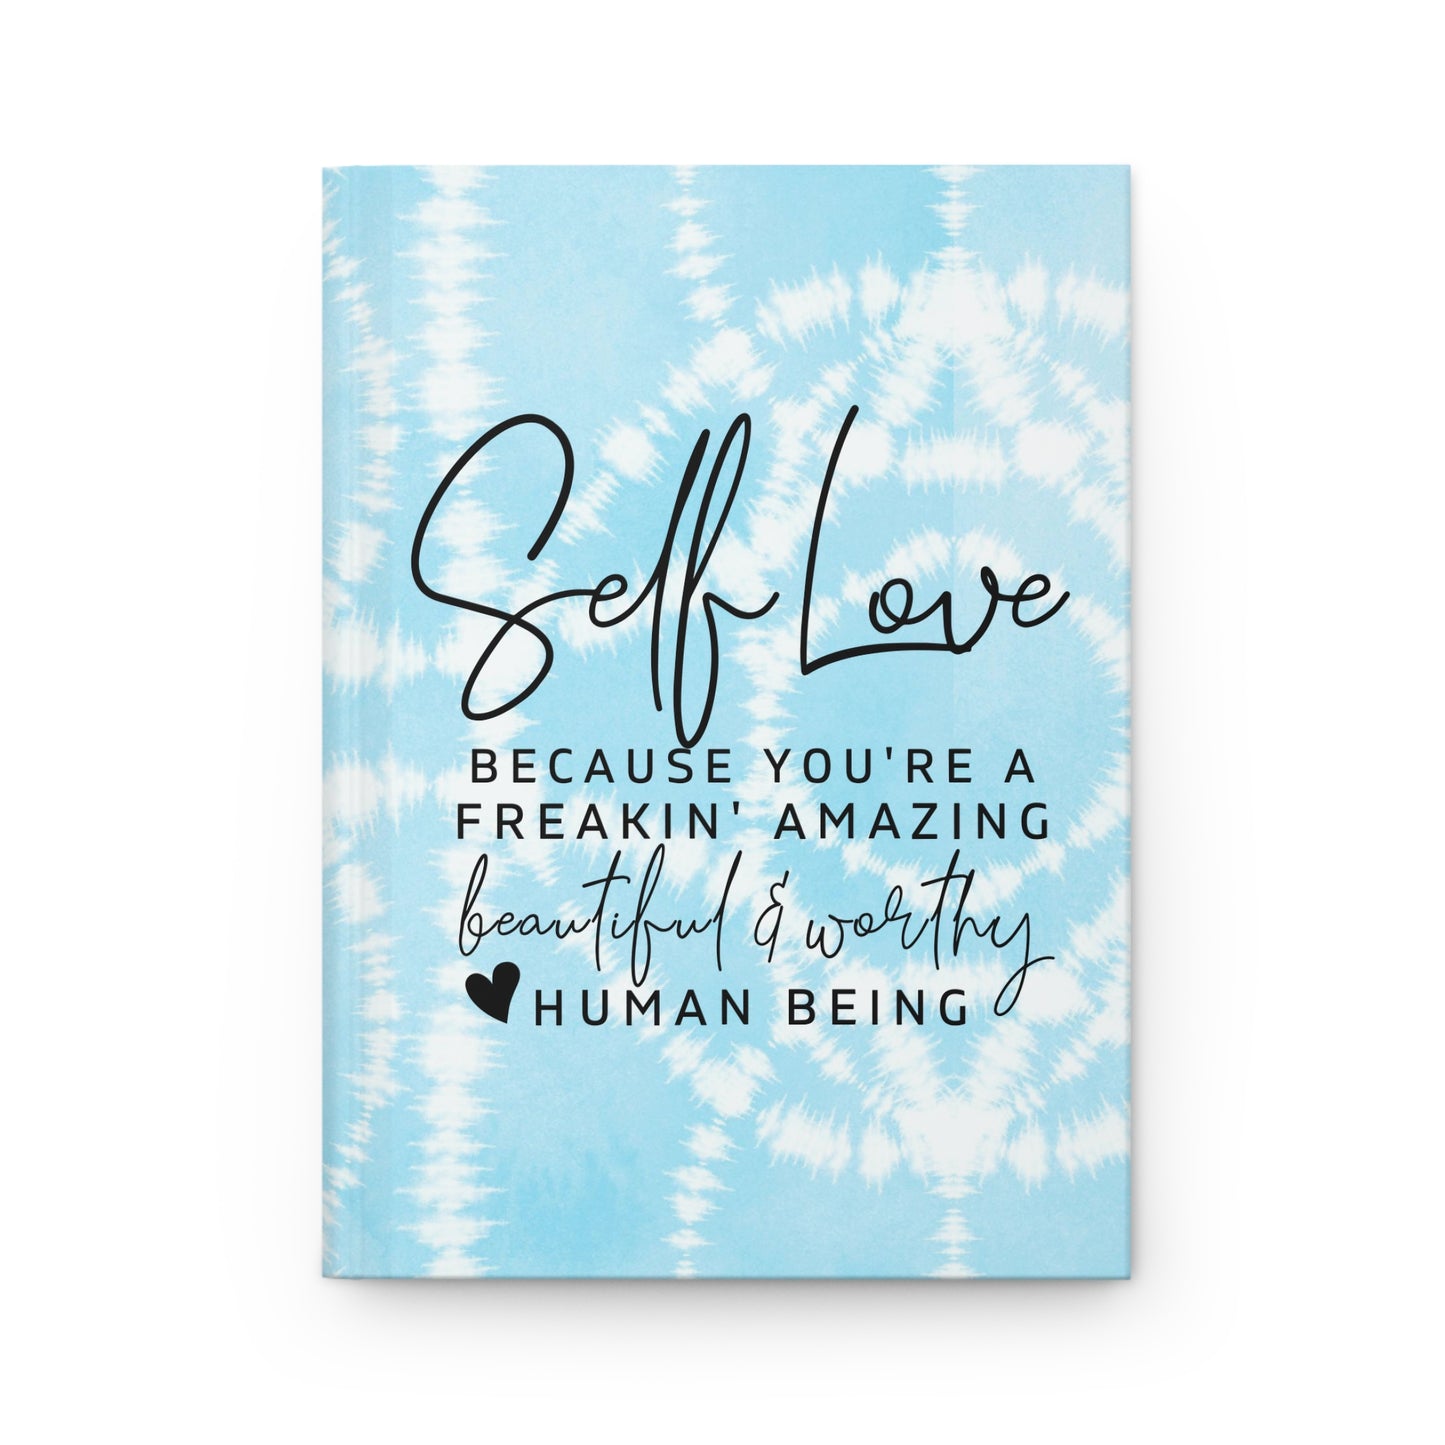 Self Love - Because You're a Freakin Amazing Beautiful and Worthy Human Being - Light Blue Batik - Hardcover Lined Journal Matte